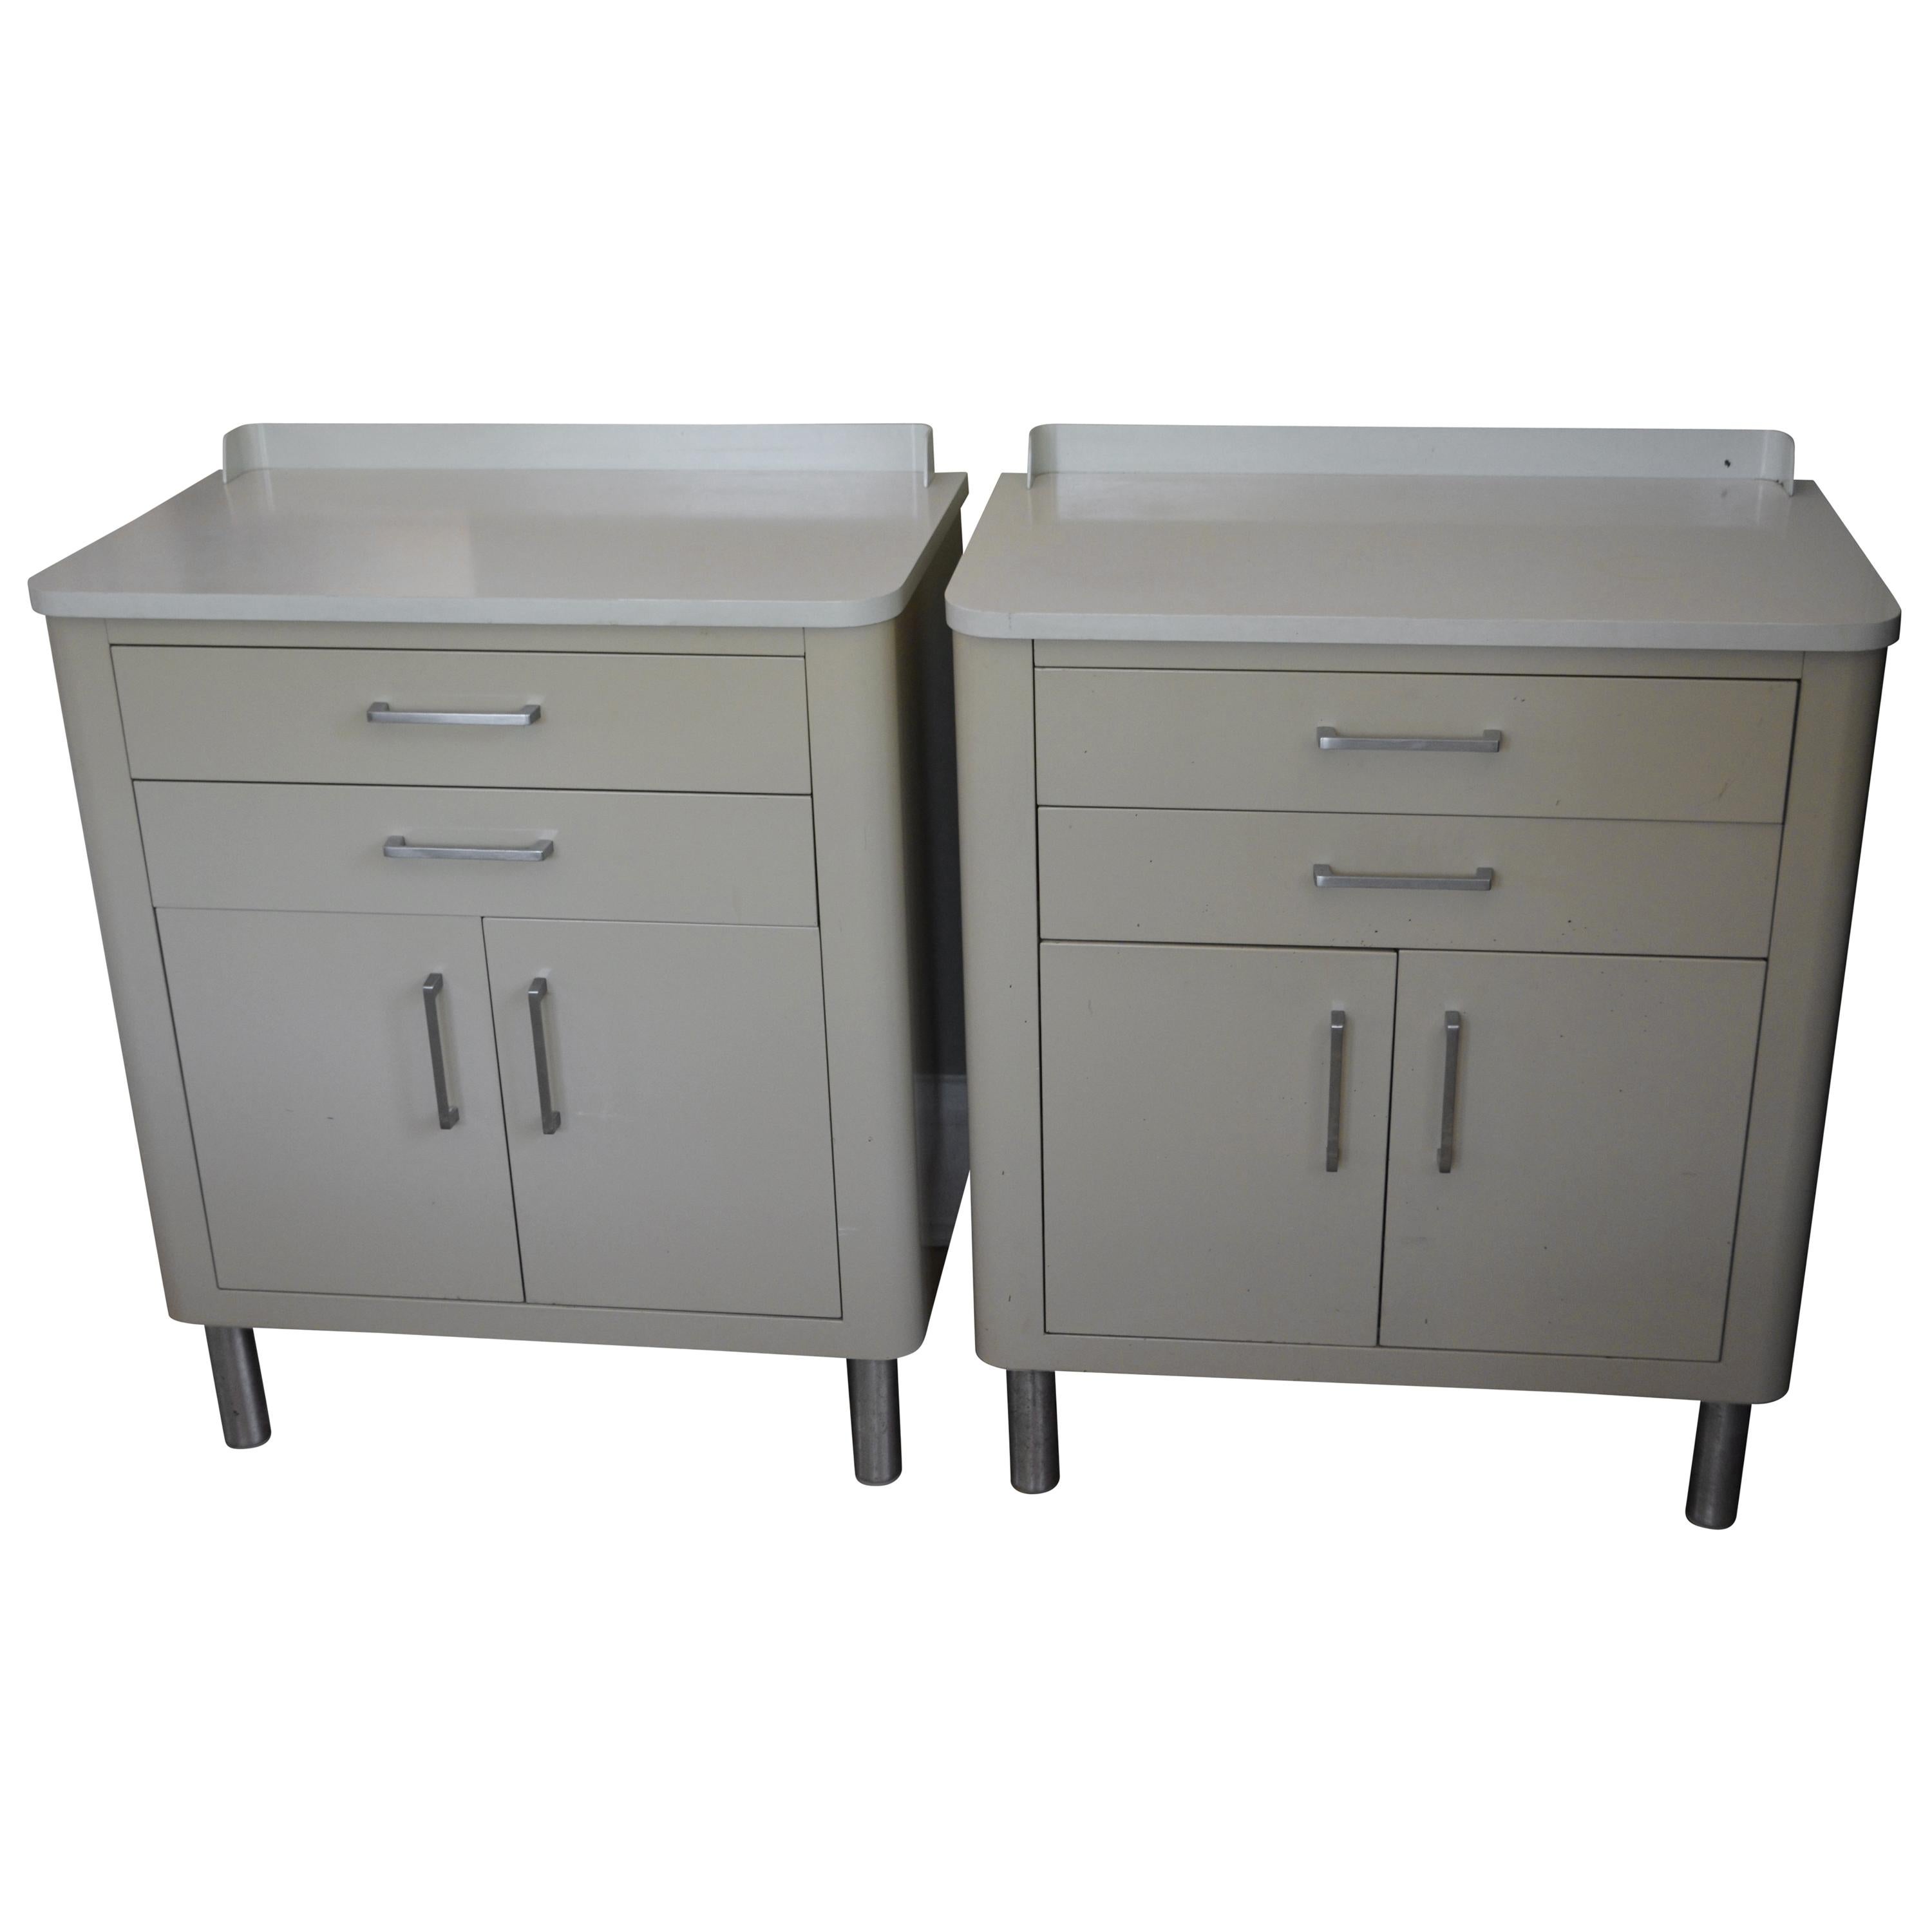 End Tables for Bedside or Sofa End Storage of Midcentury Two-Tone Steel, Pair